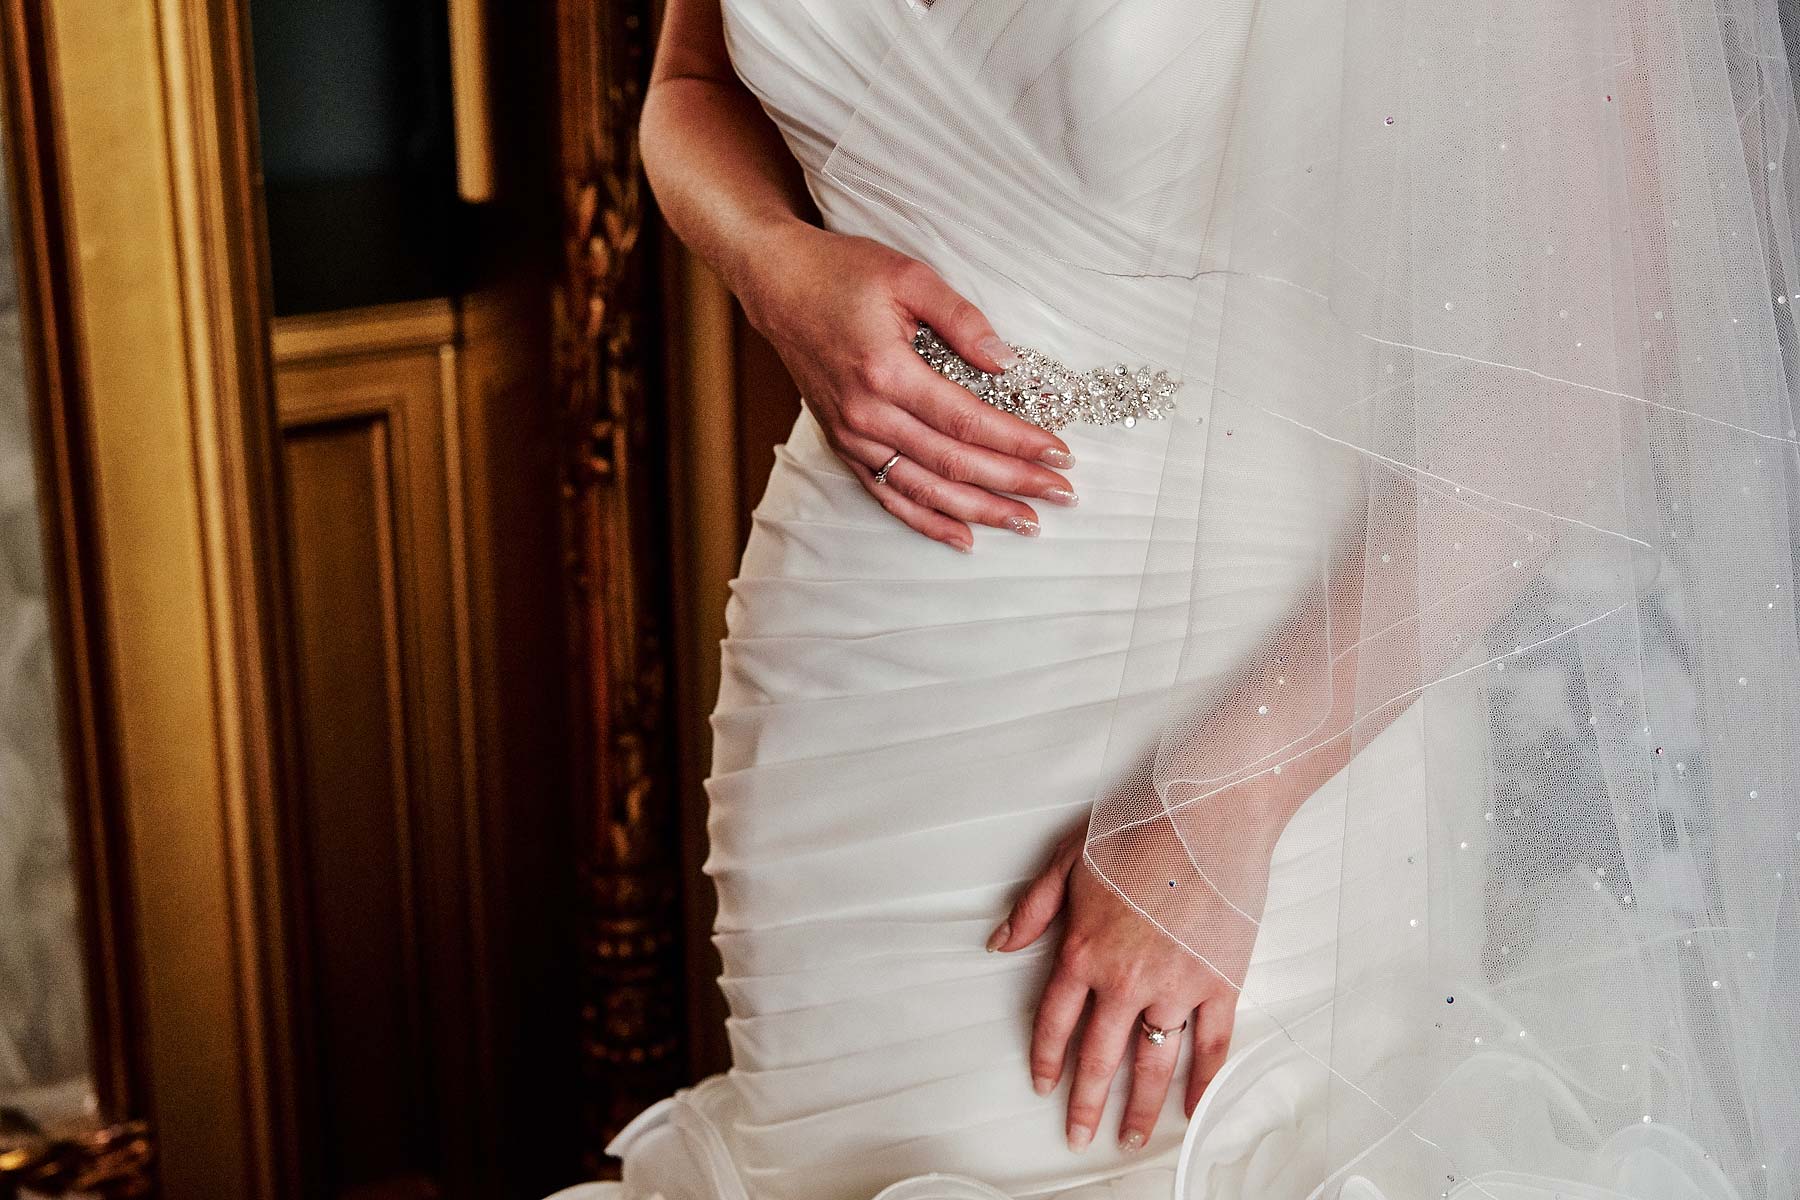 Beautiful and emotional scenes as the bride prepares in her stunning gown at Allerton Castle in Yorkshire by Documentary Wedding Photographer Stuart James